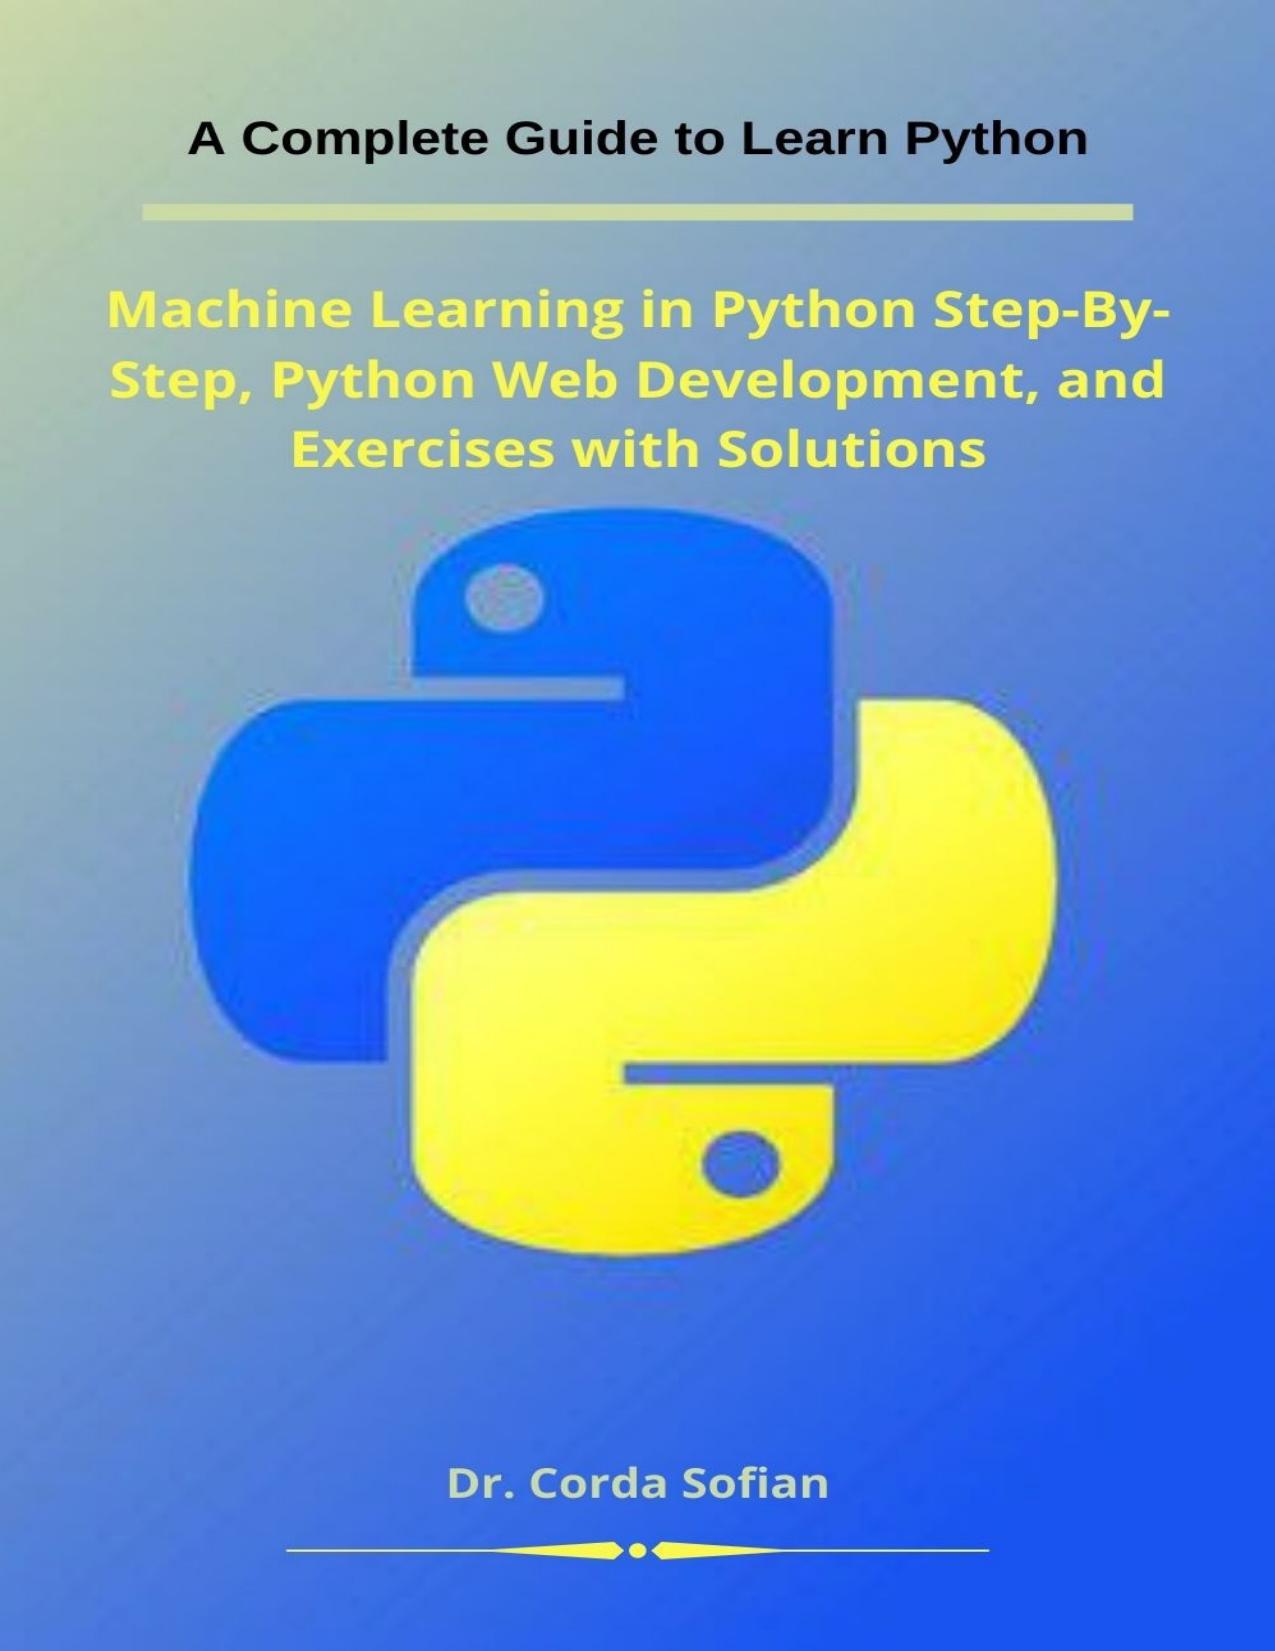 A Complete Guide to Learn Python: Machine Learning in Python Step-By-Step, Python Web Development, and Exercises with Solutions by Sofian Mr. Corda